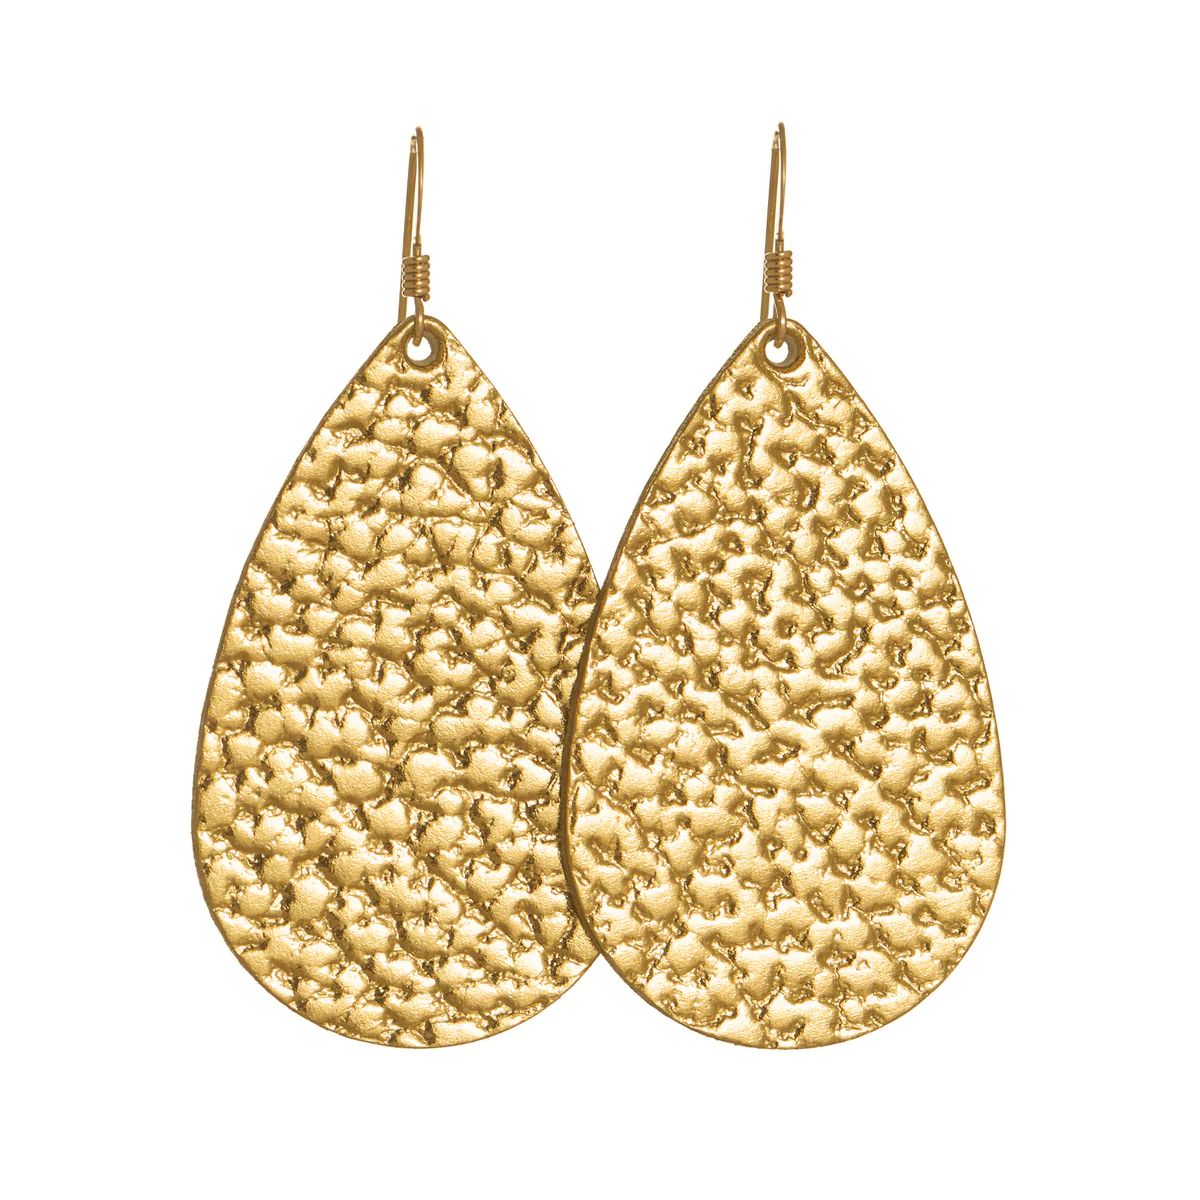 Hammered Gold Teardrops | Nickel and Suede